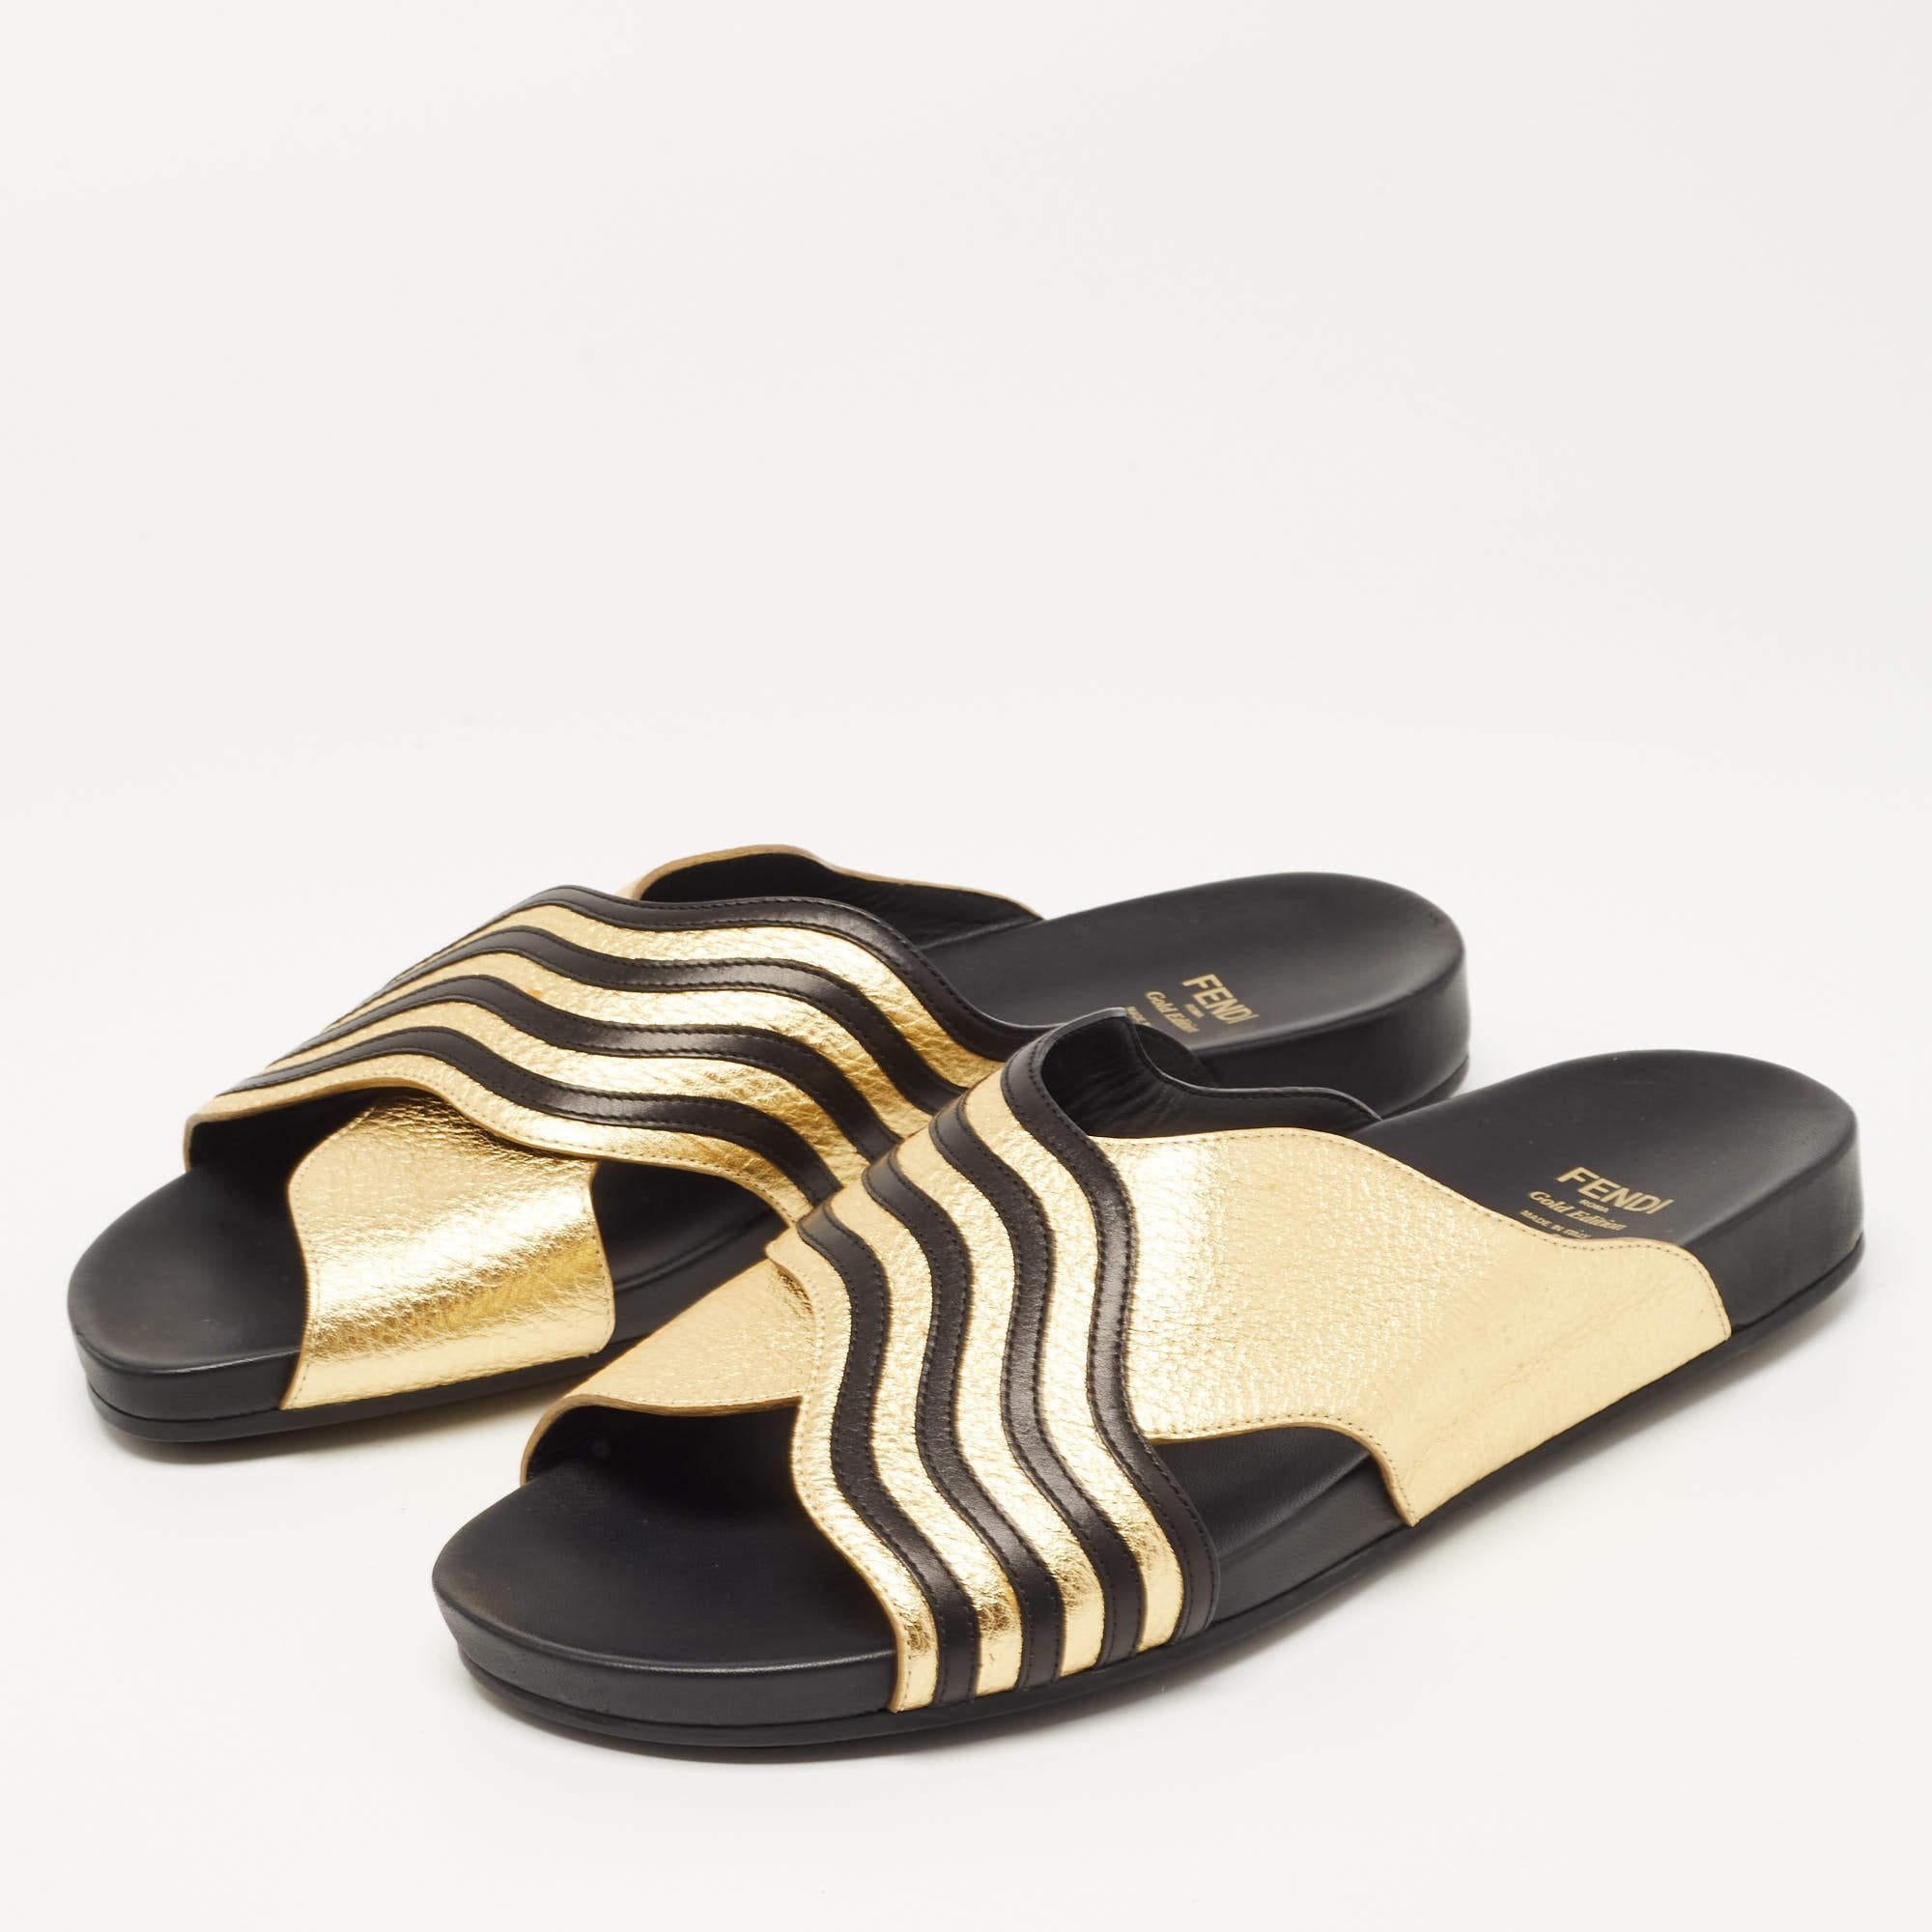 Fendi's rubber slides for women have leather wave straps on the uppers. They're perfect for the beach, vacation days, or everyday use.

